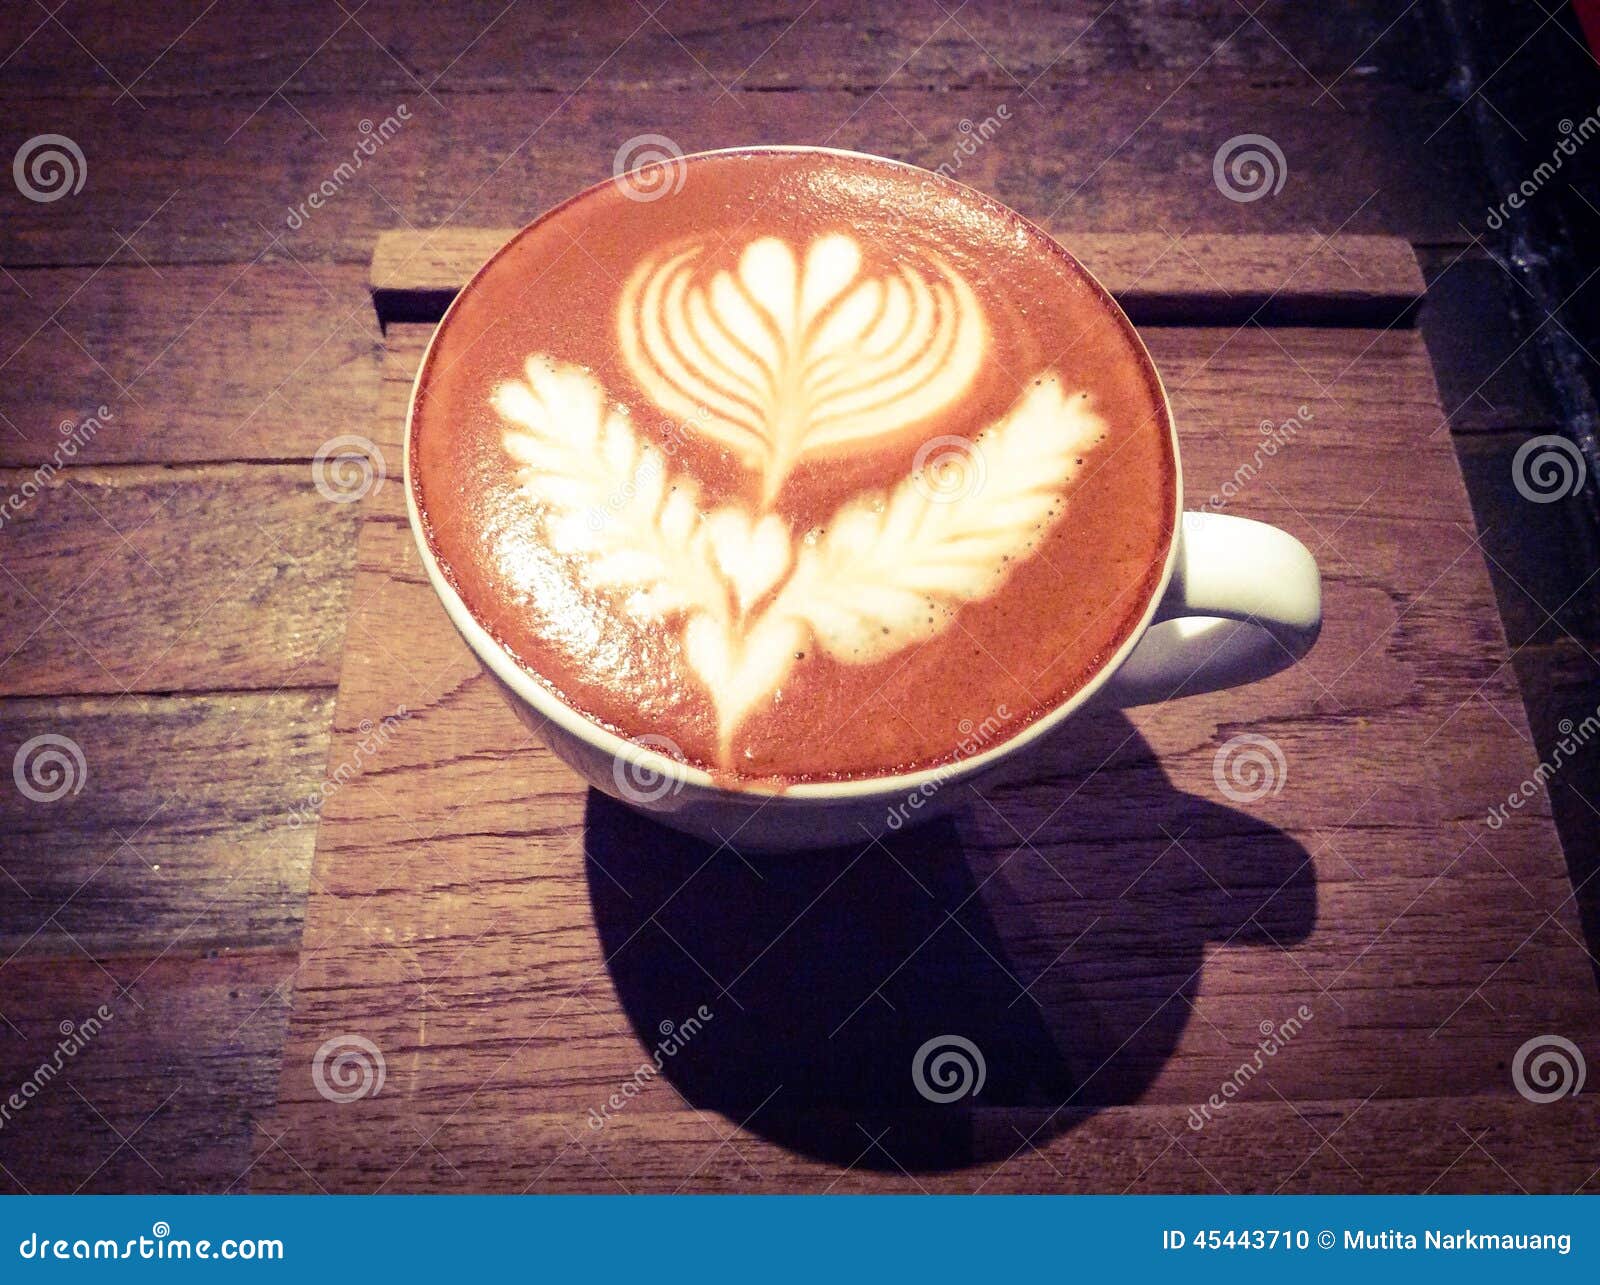 cup of hot latte or cappuccino with fascinating latte art